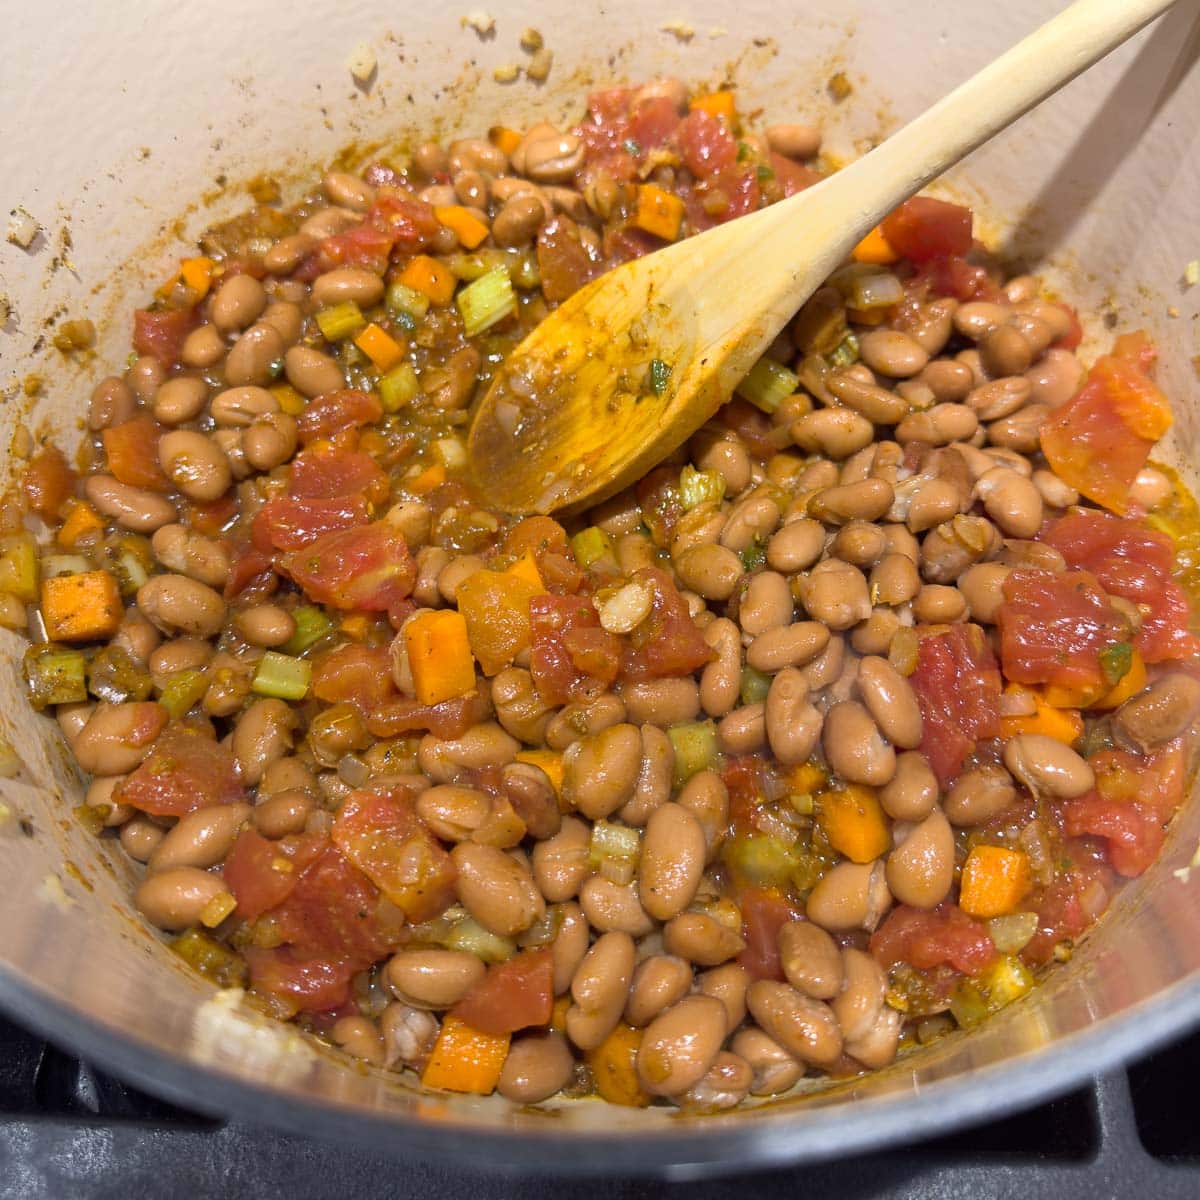 Beans and vegetables cooking in a large heavy pot for tortilla soup.